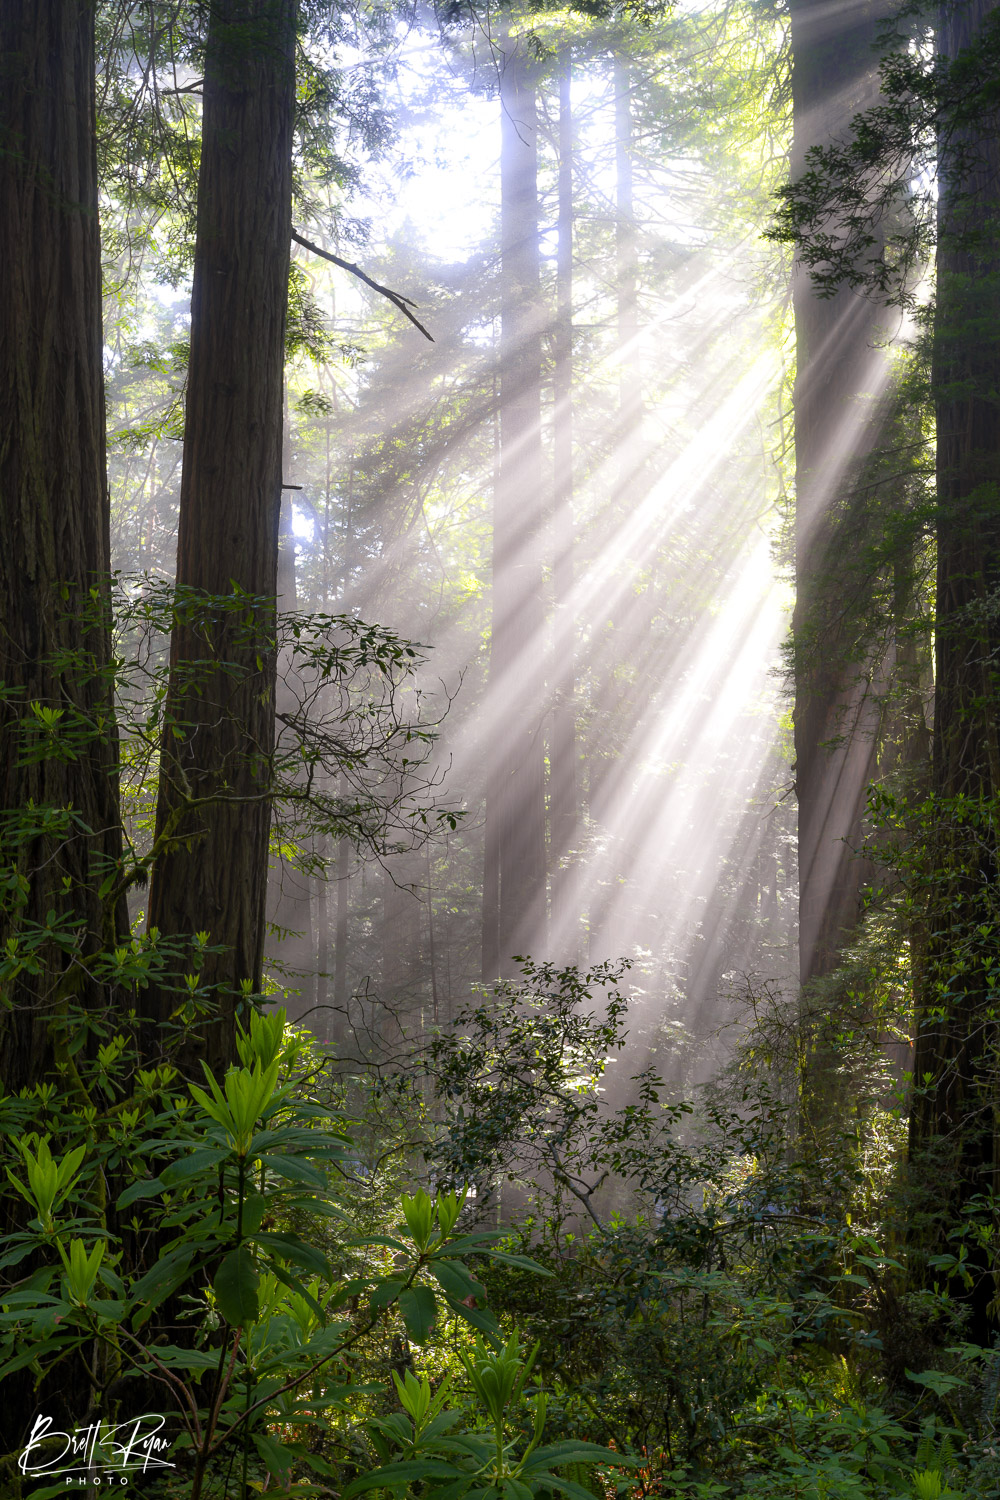 Image captured in a Redwood Forest. Limited Edition Print of 50.